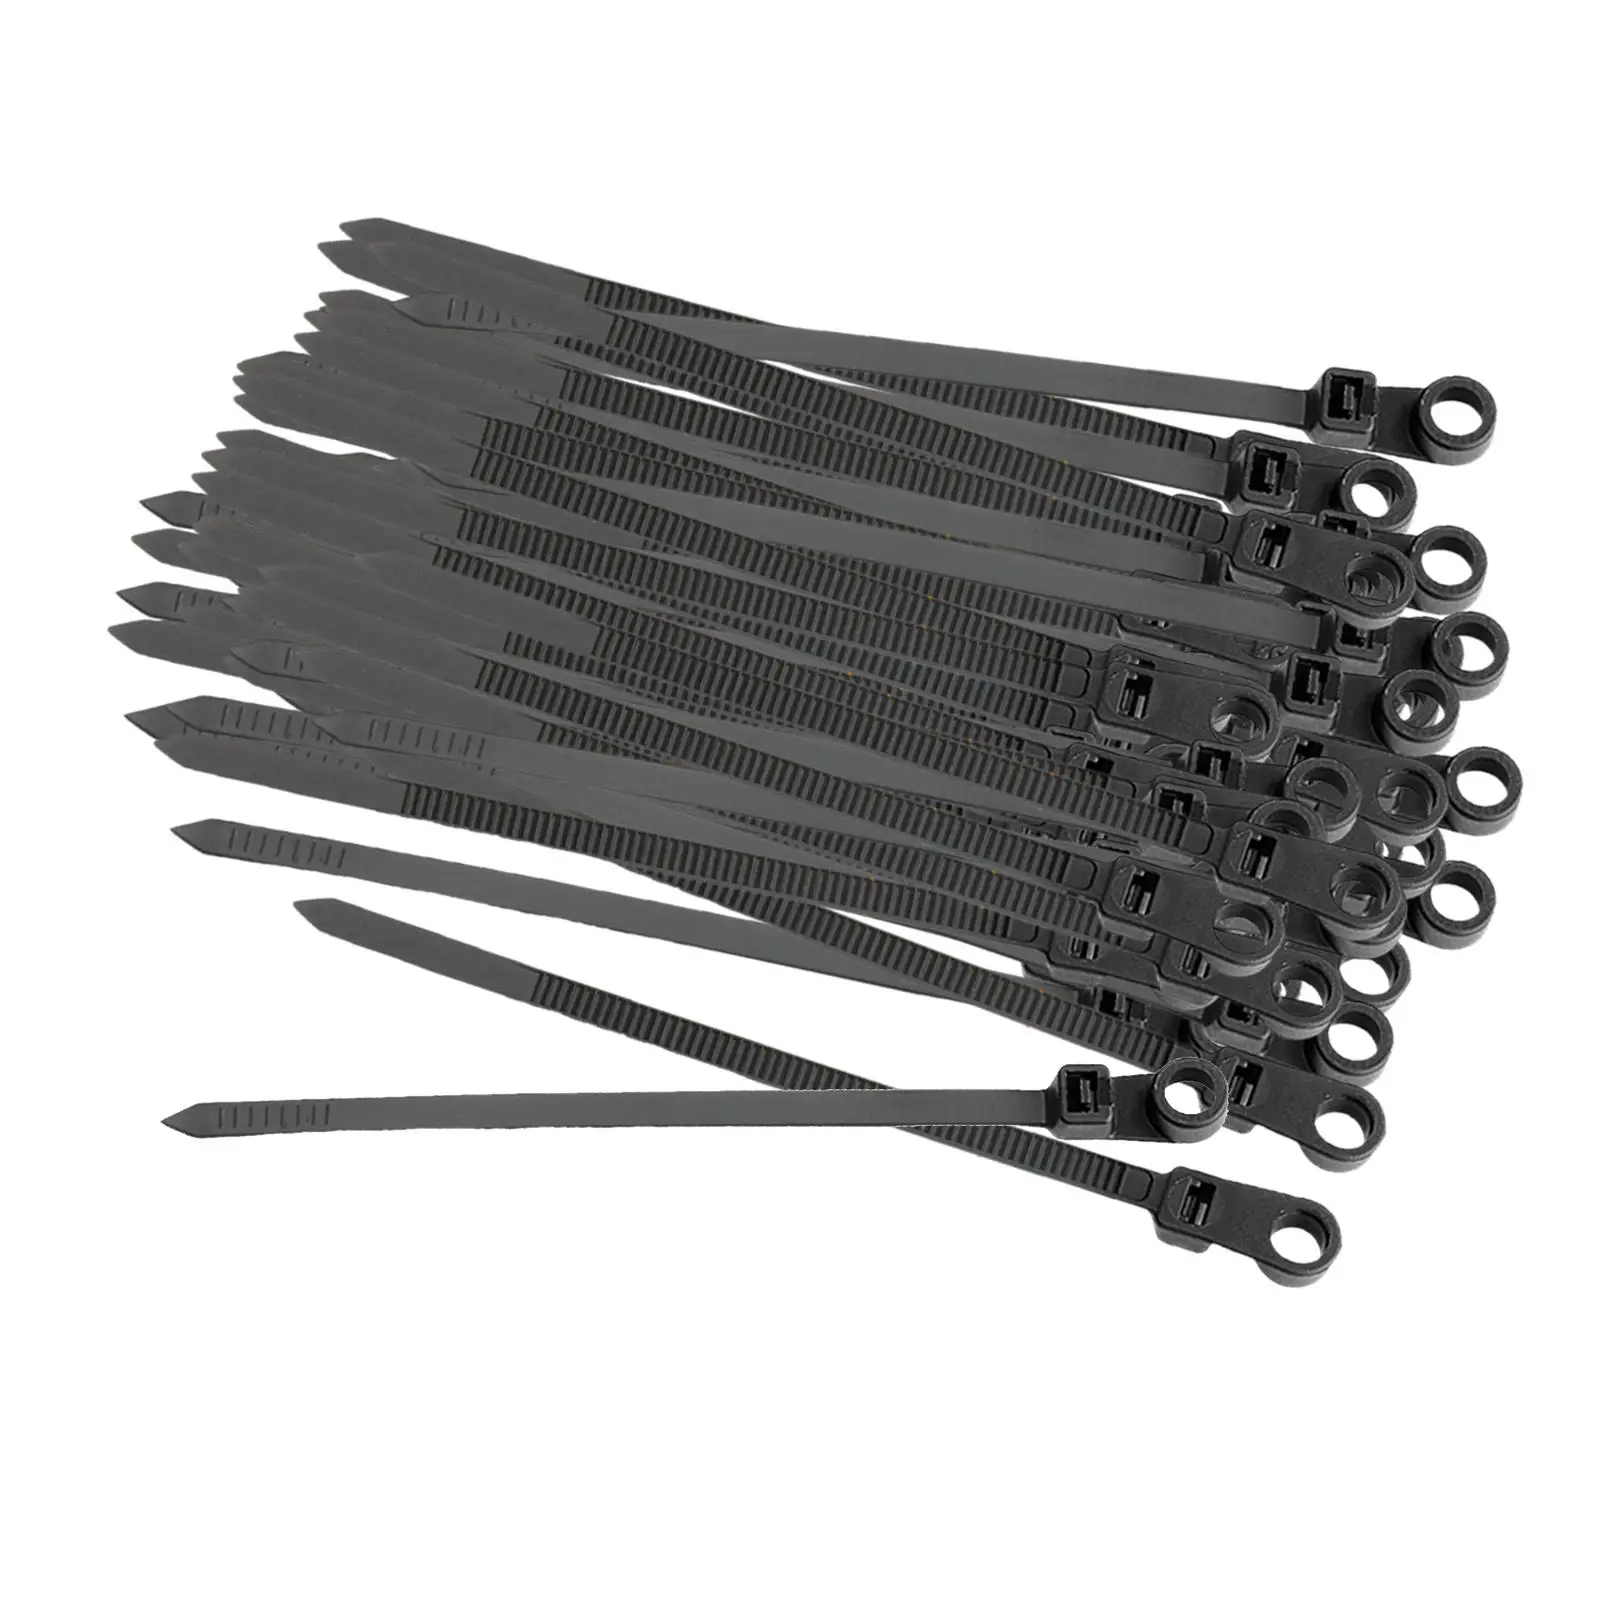 100Pcs Nylon Cable Zips Wire Ties with Screw Hole Durable Self Locking Tie Wraps for Garden Home Garage Workshop Office